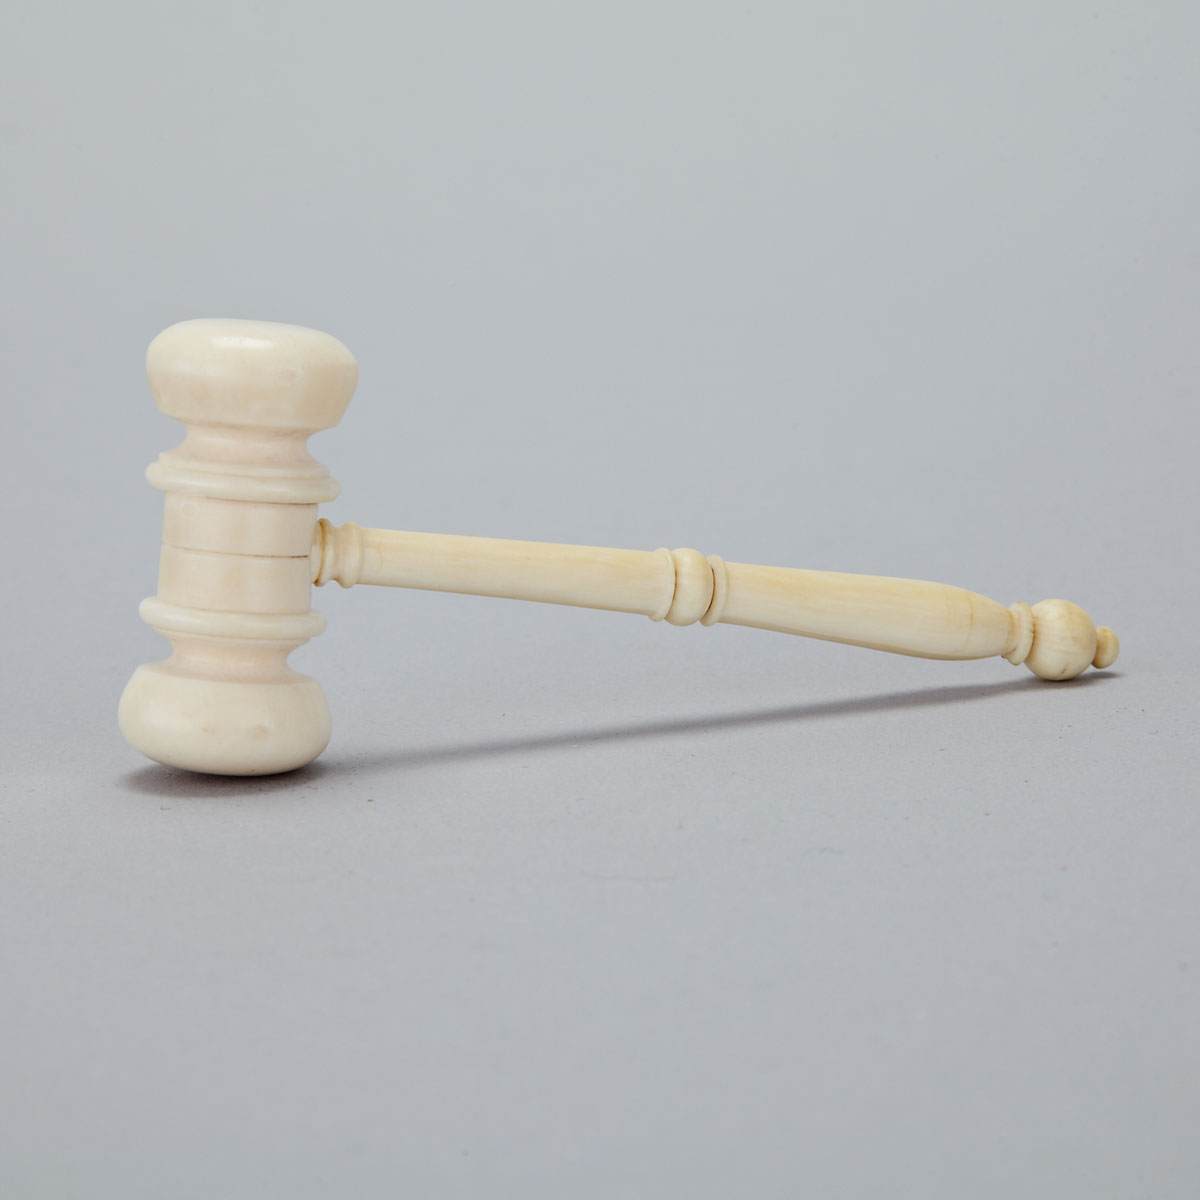 Miniature Turned Ivory Model of a Gavel, 19th century